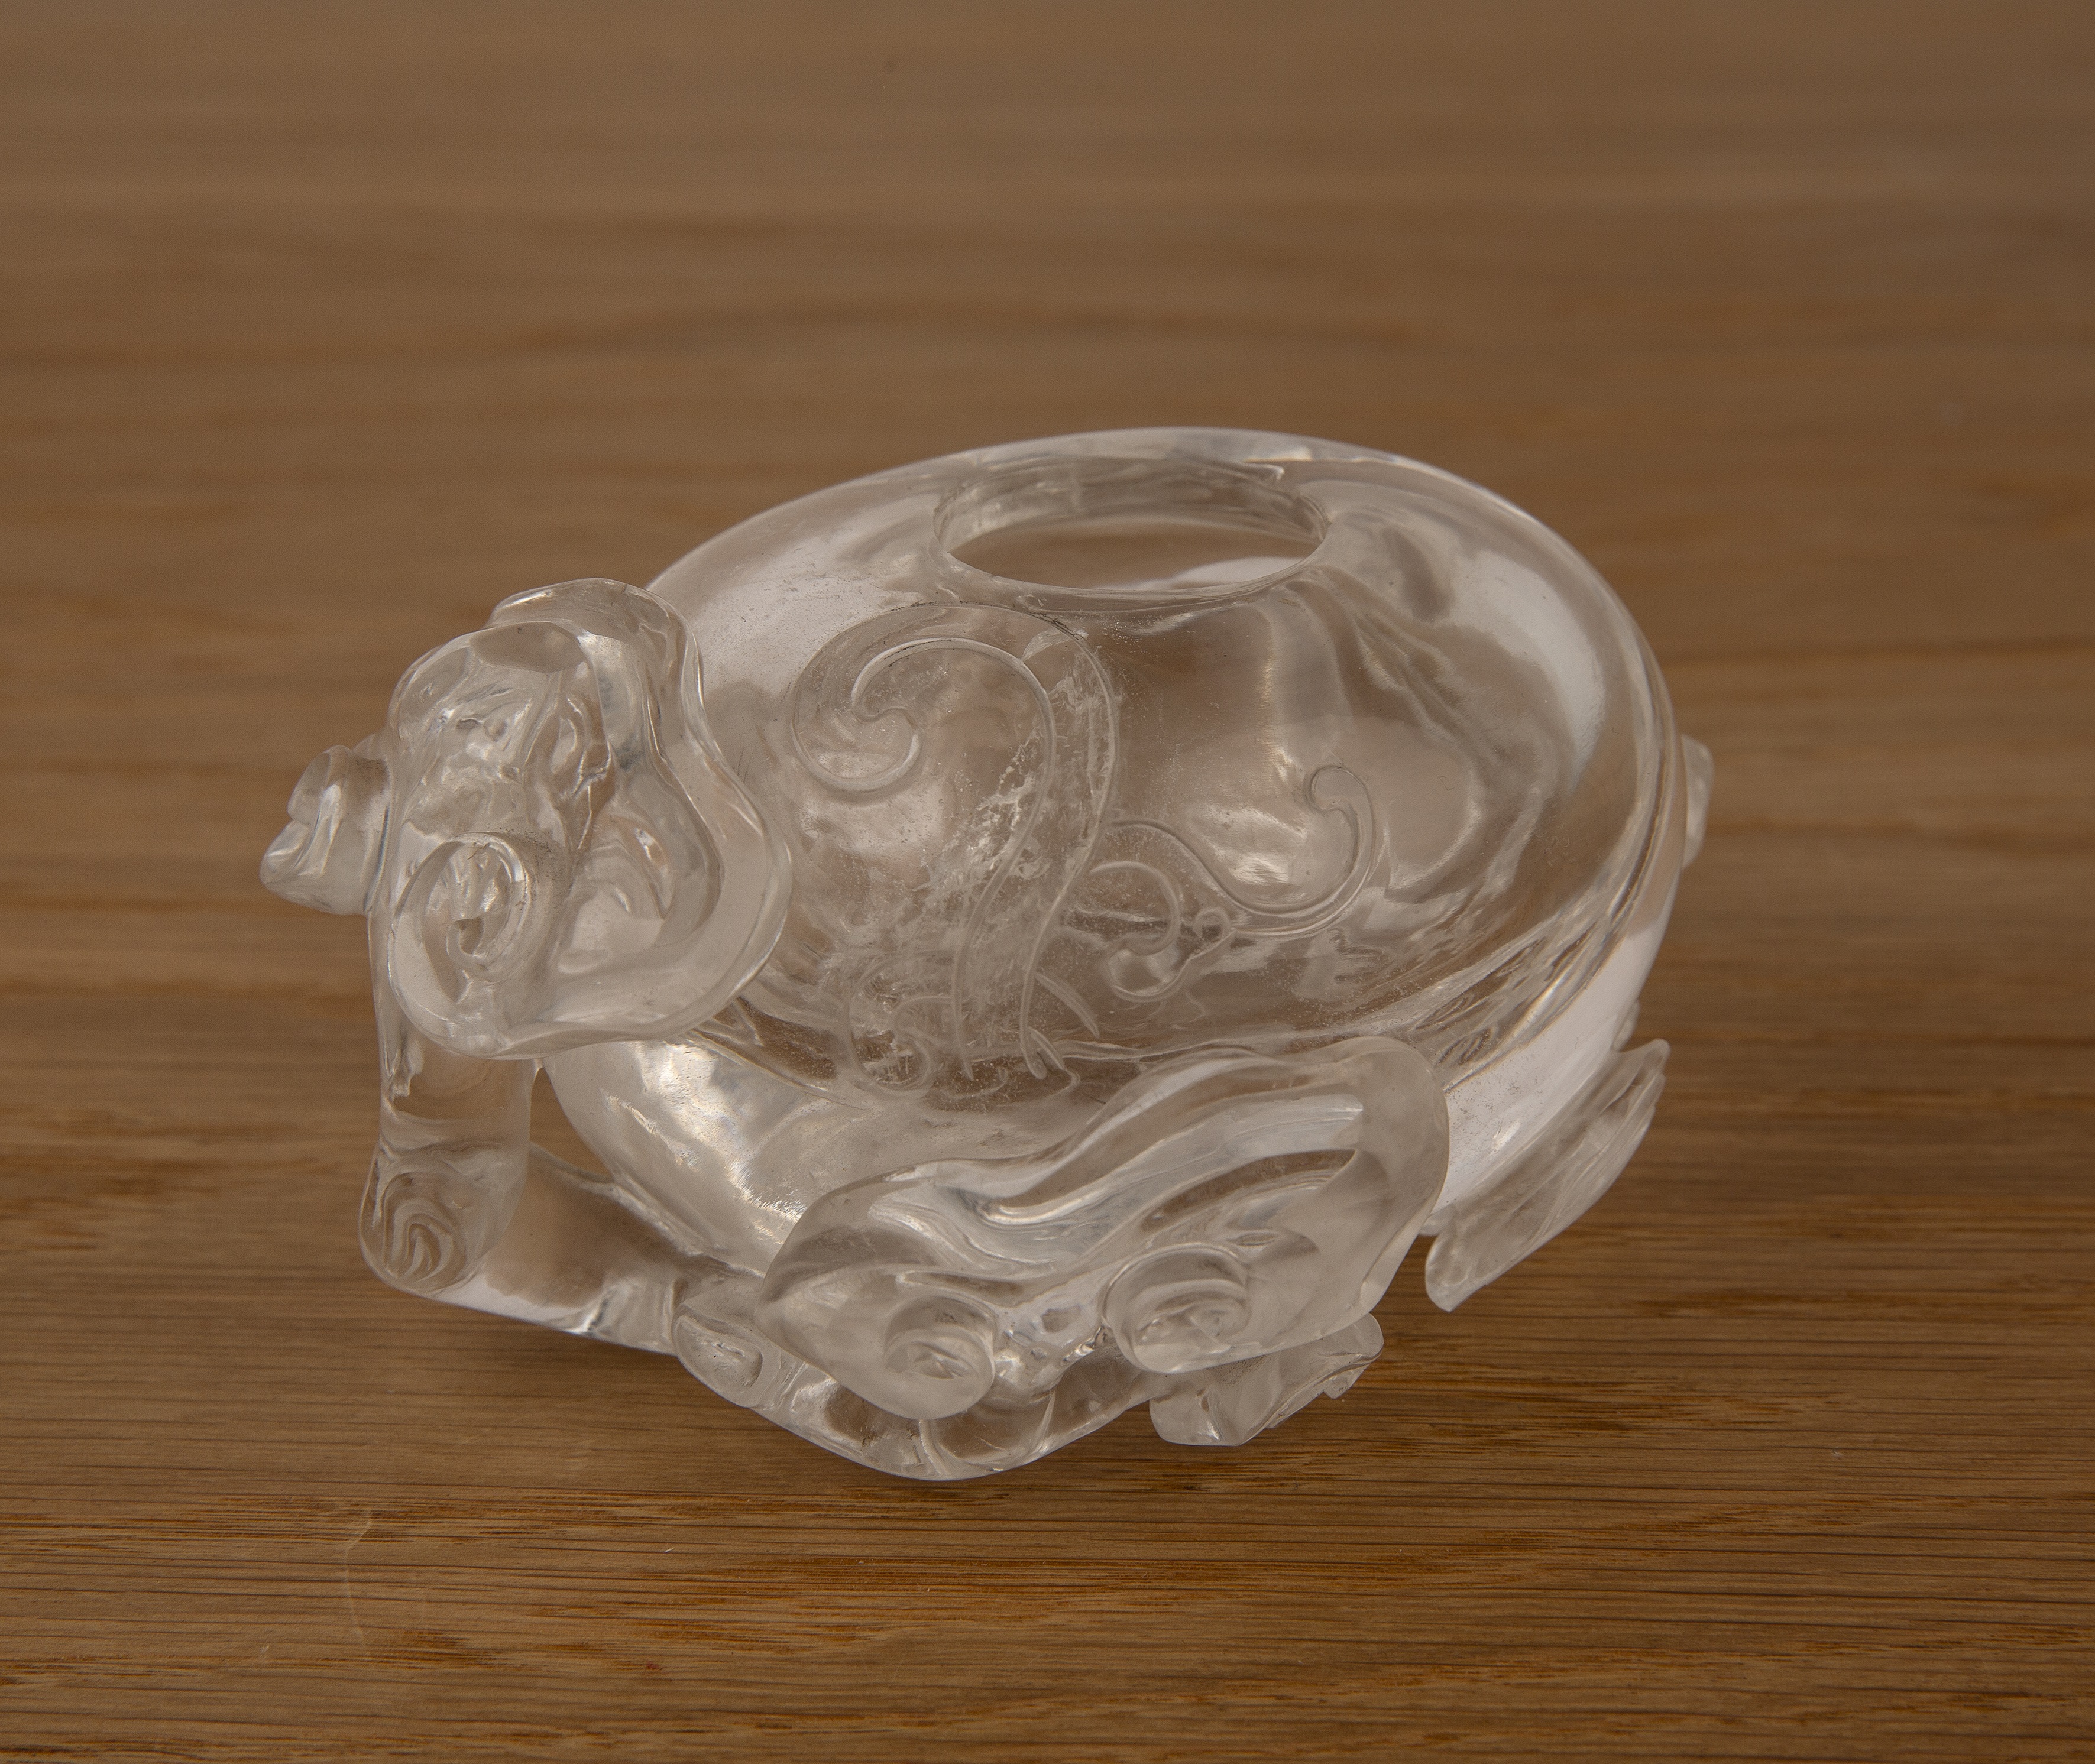 Rock crystal brush washer Chinese, 18th/19th Century of oval form, with trailing lingzhi fungus - Image 3 of 9